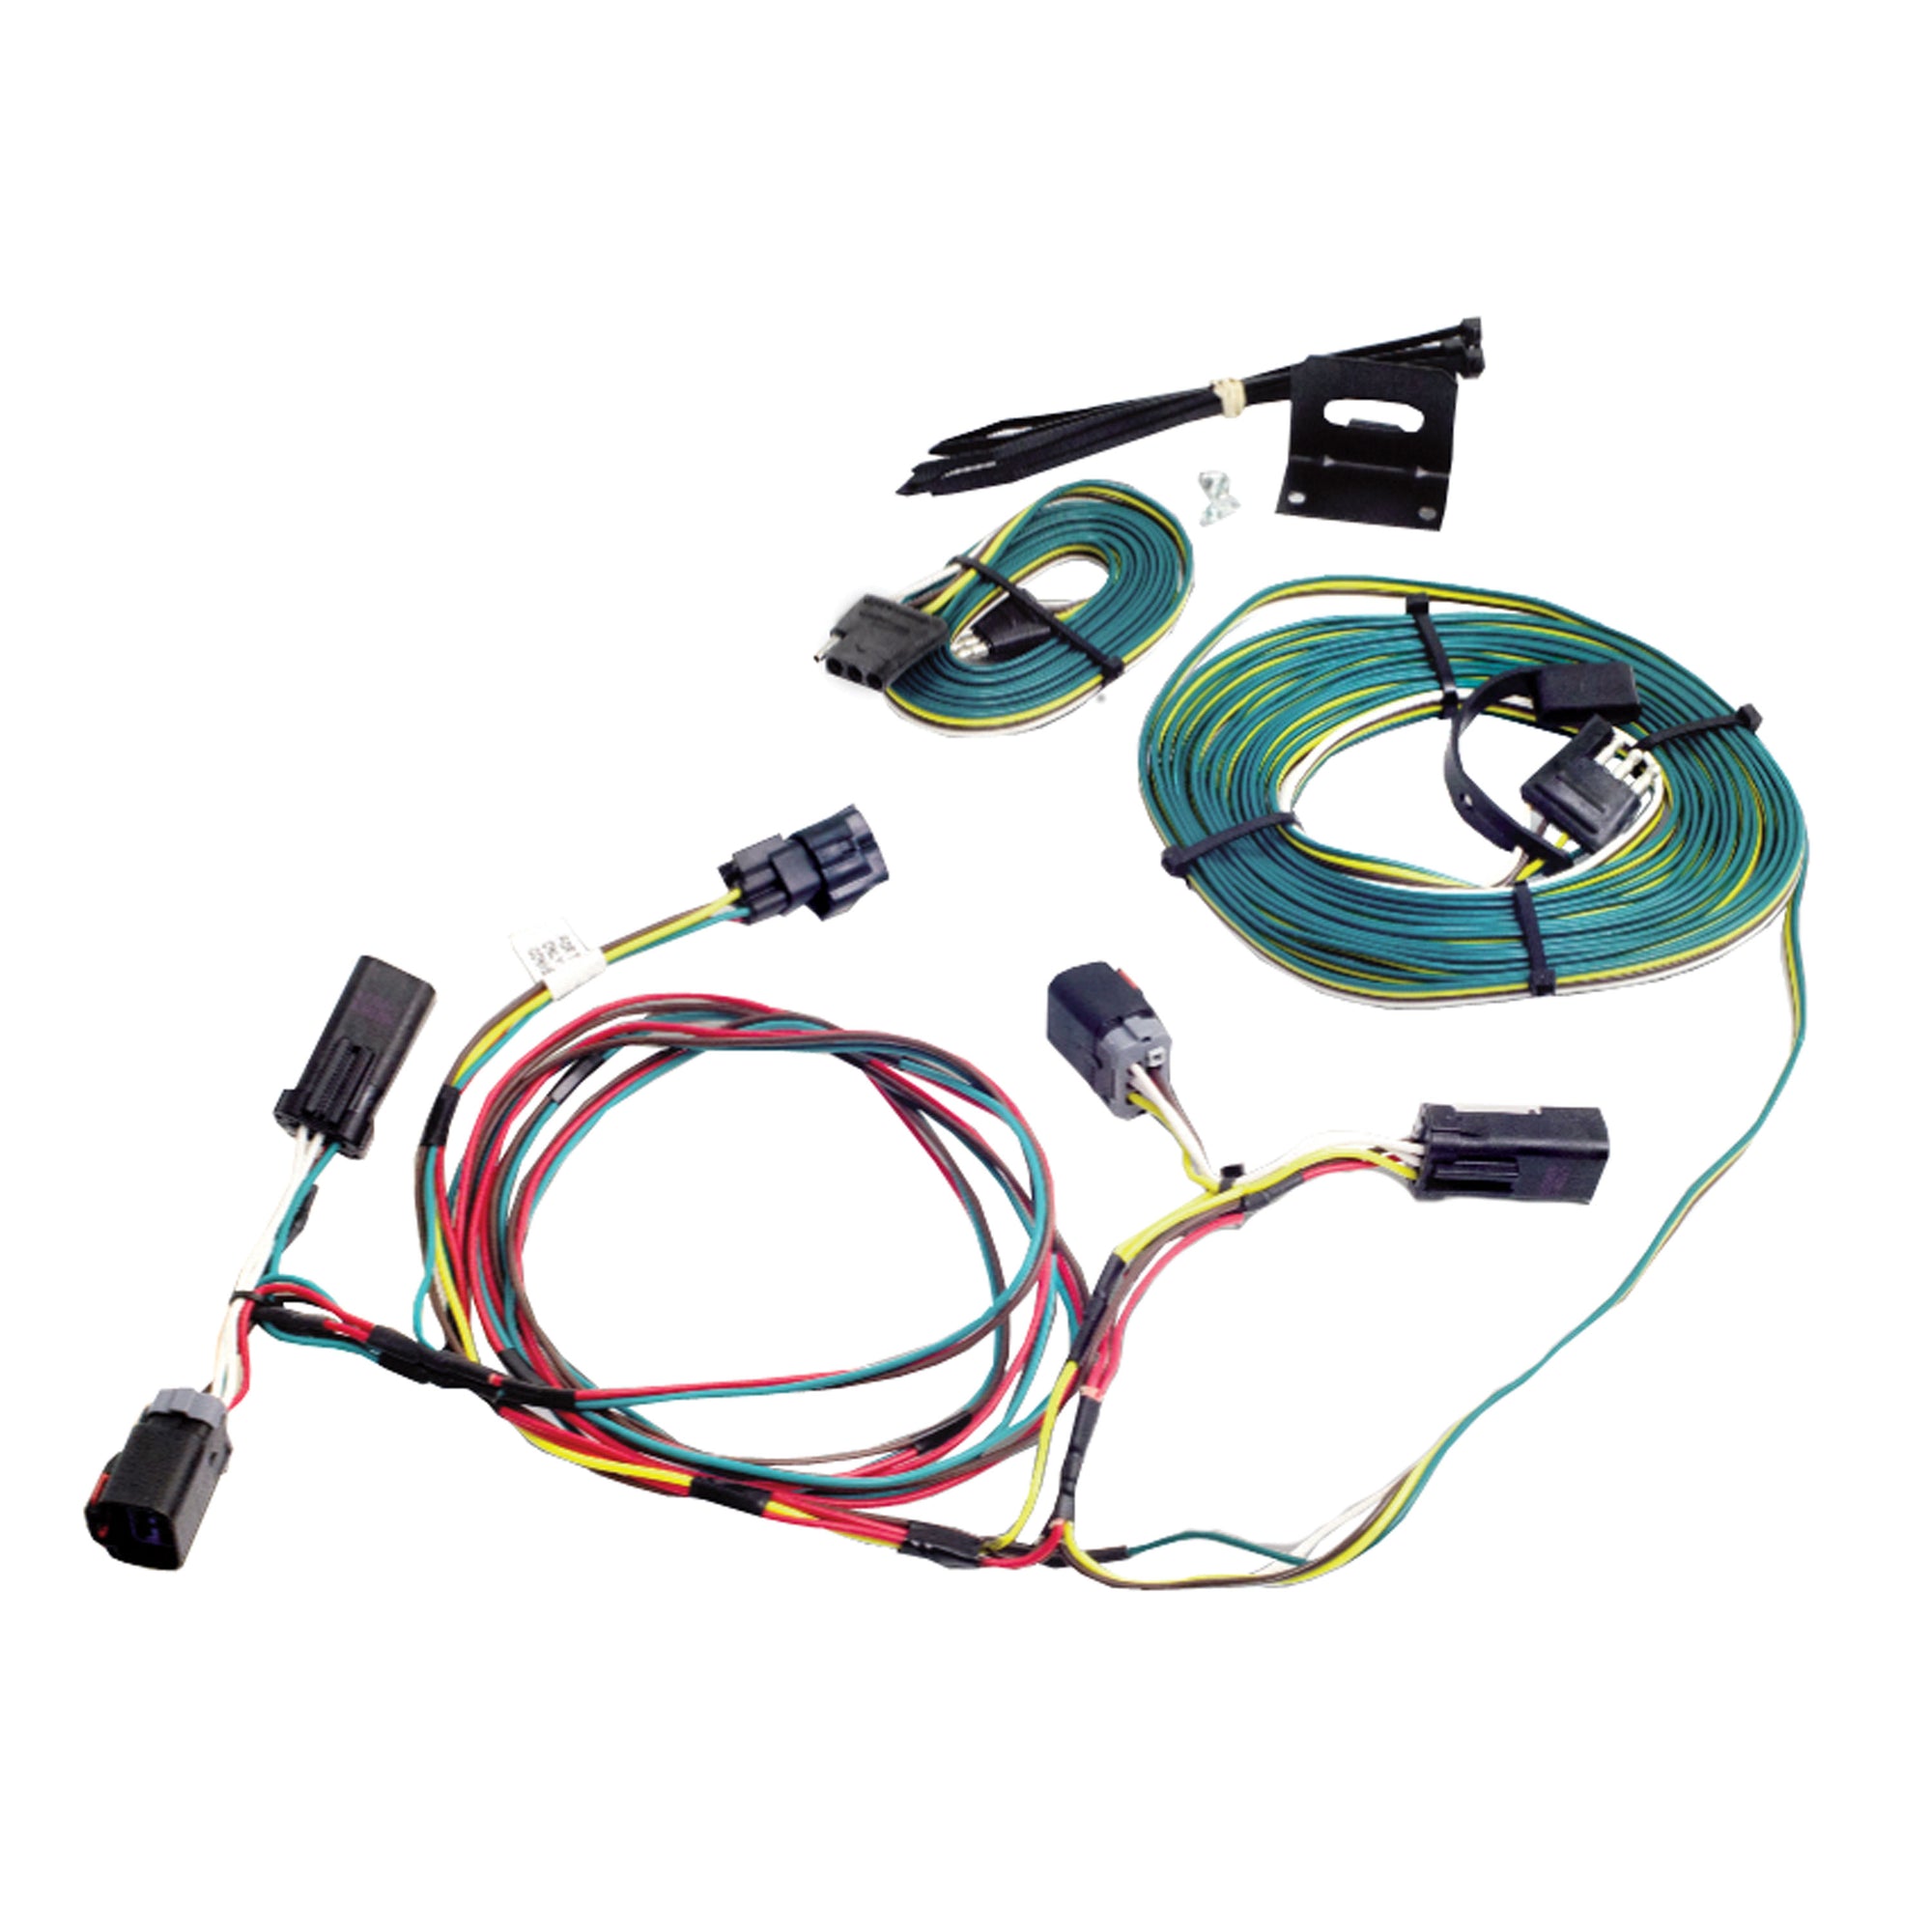 Demco 9523095 Towed Connector Vehicle Wiring Kit - For Saturn Ion '05-'07